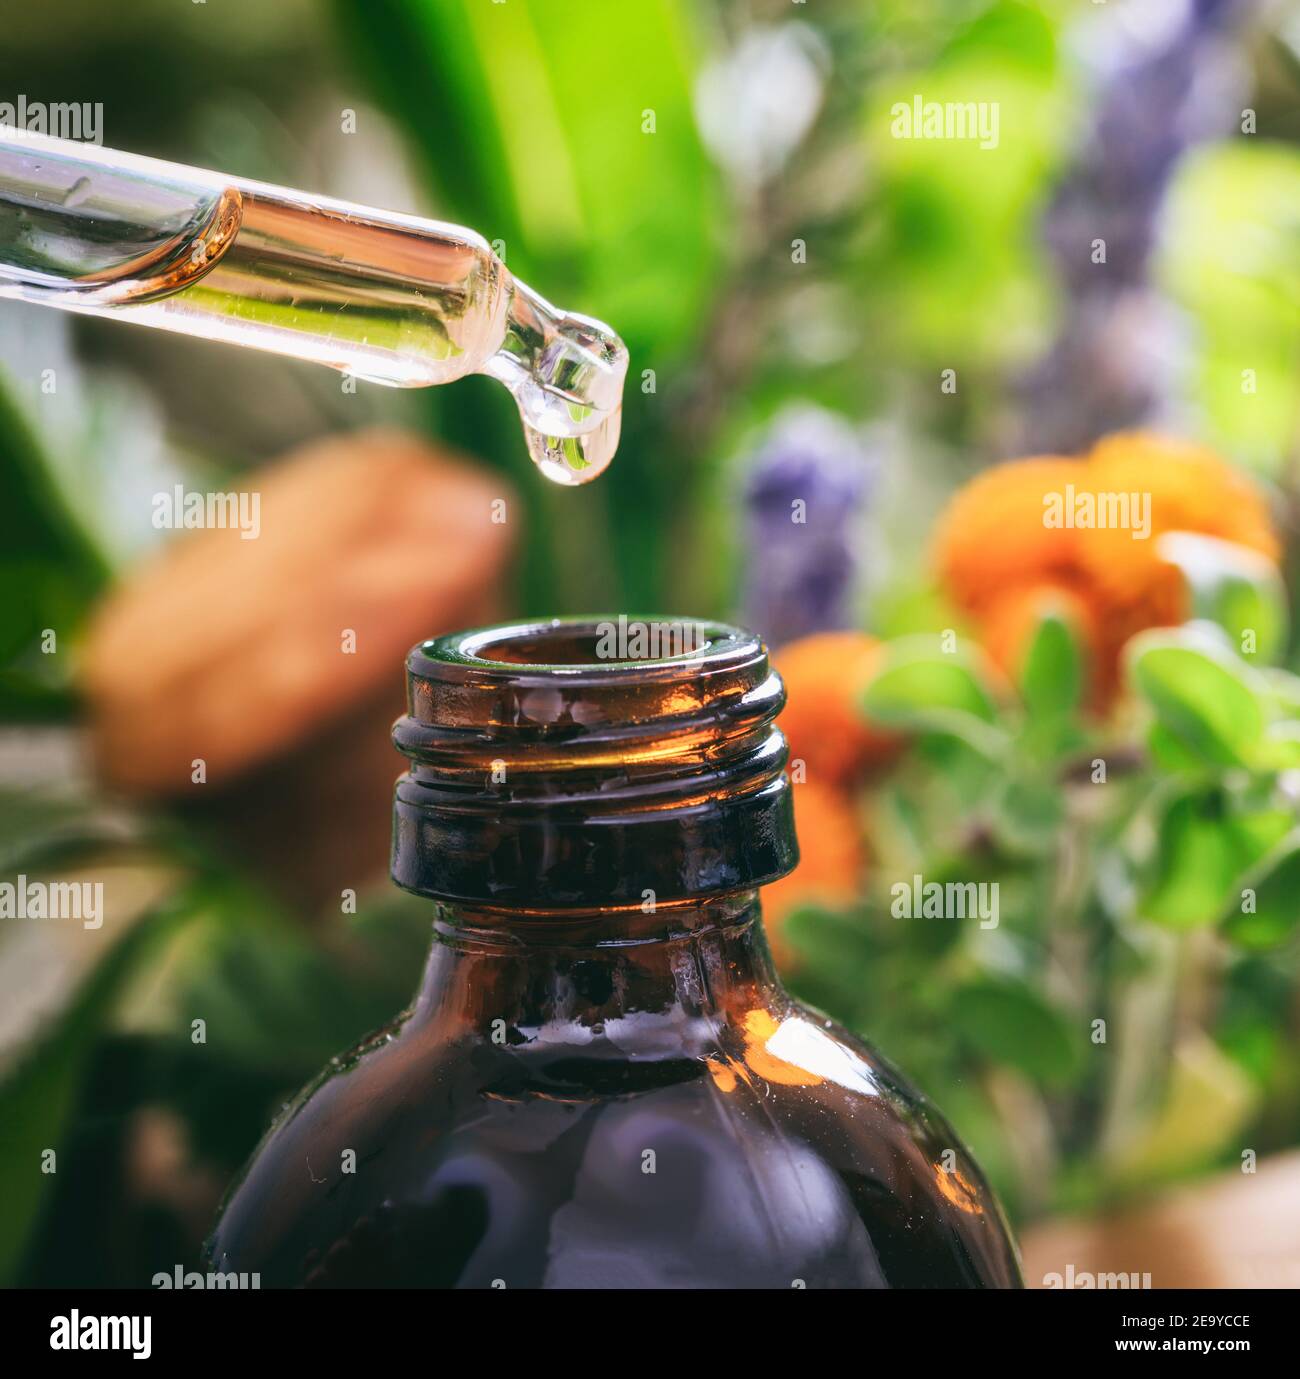 Alternative medicinal, homeopathy, aromatherapy, essential oil drop from pipette to bottle. Dropper closeup on blur variety of fresh herbs background. Stock Photo